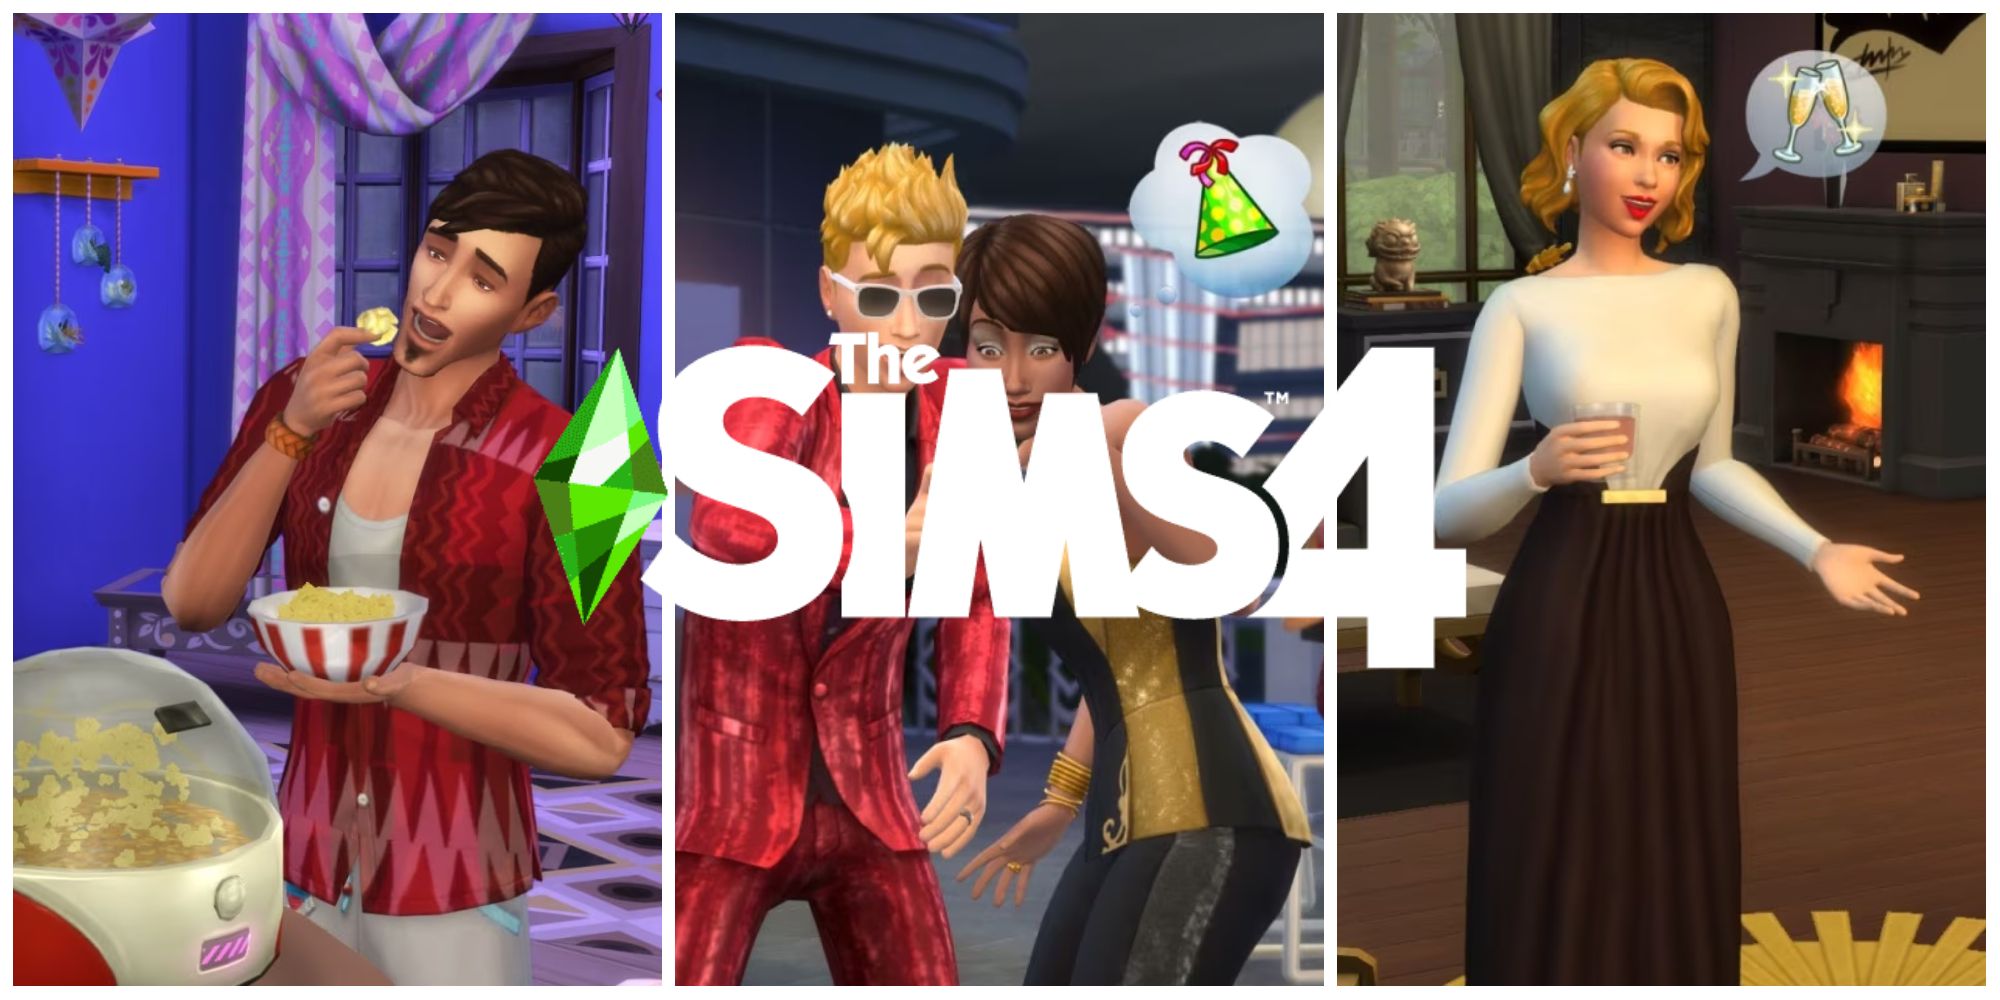 u^  Sims 4 children, Sims 4 anime, Sims 4 challenges